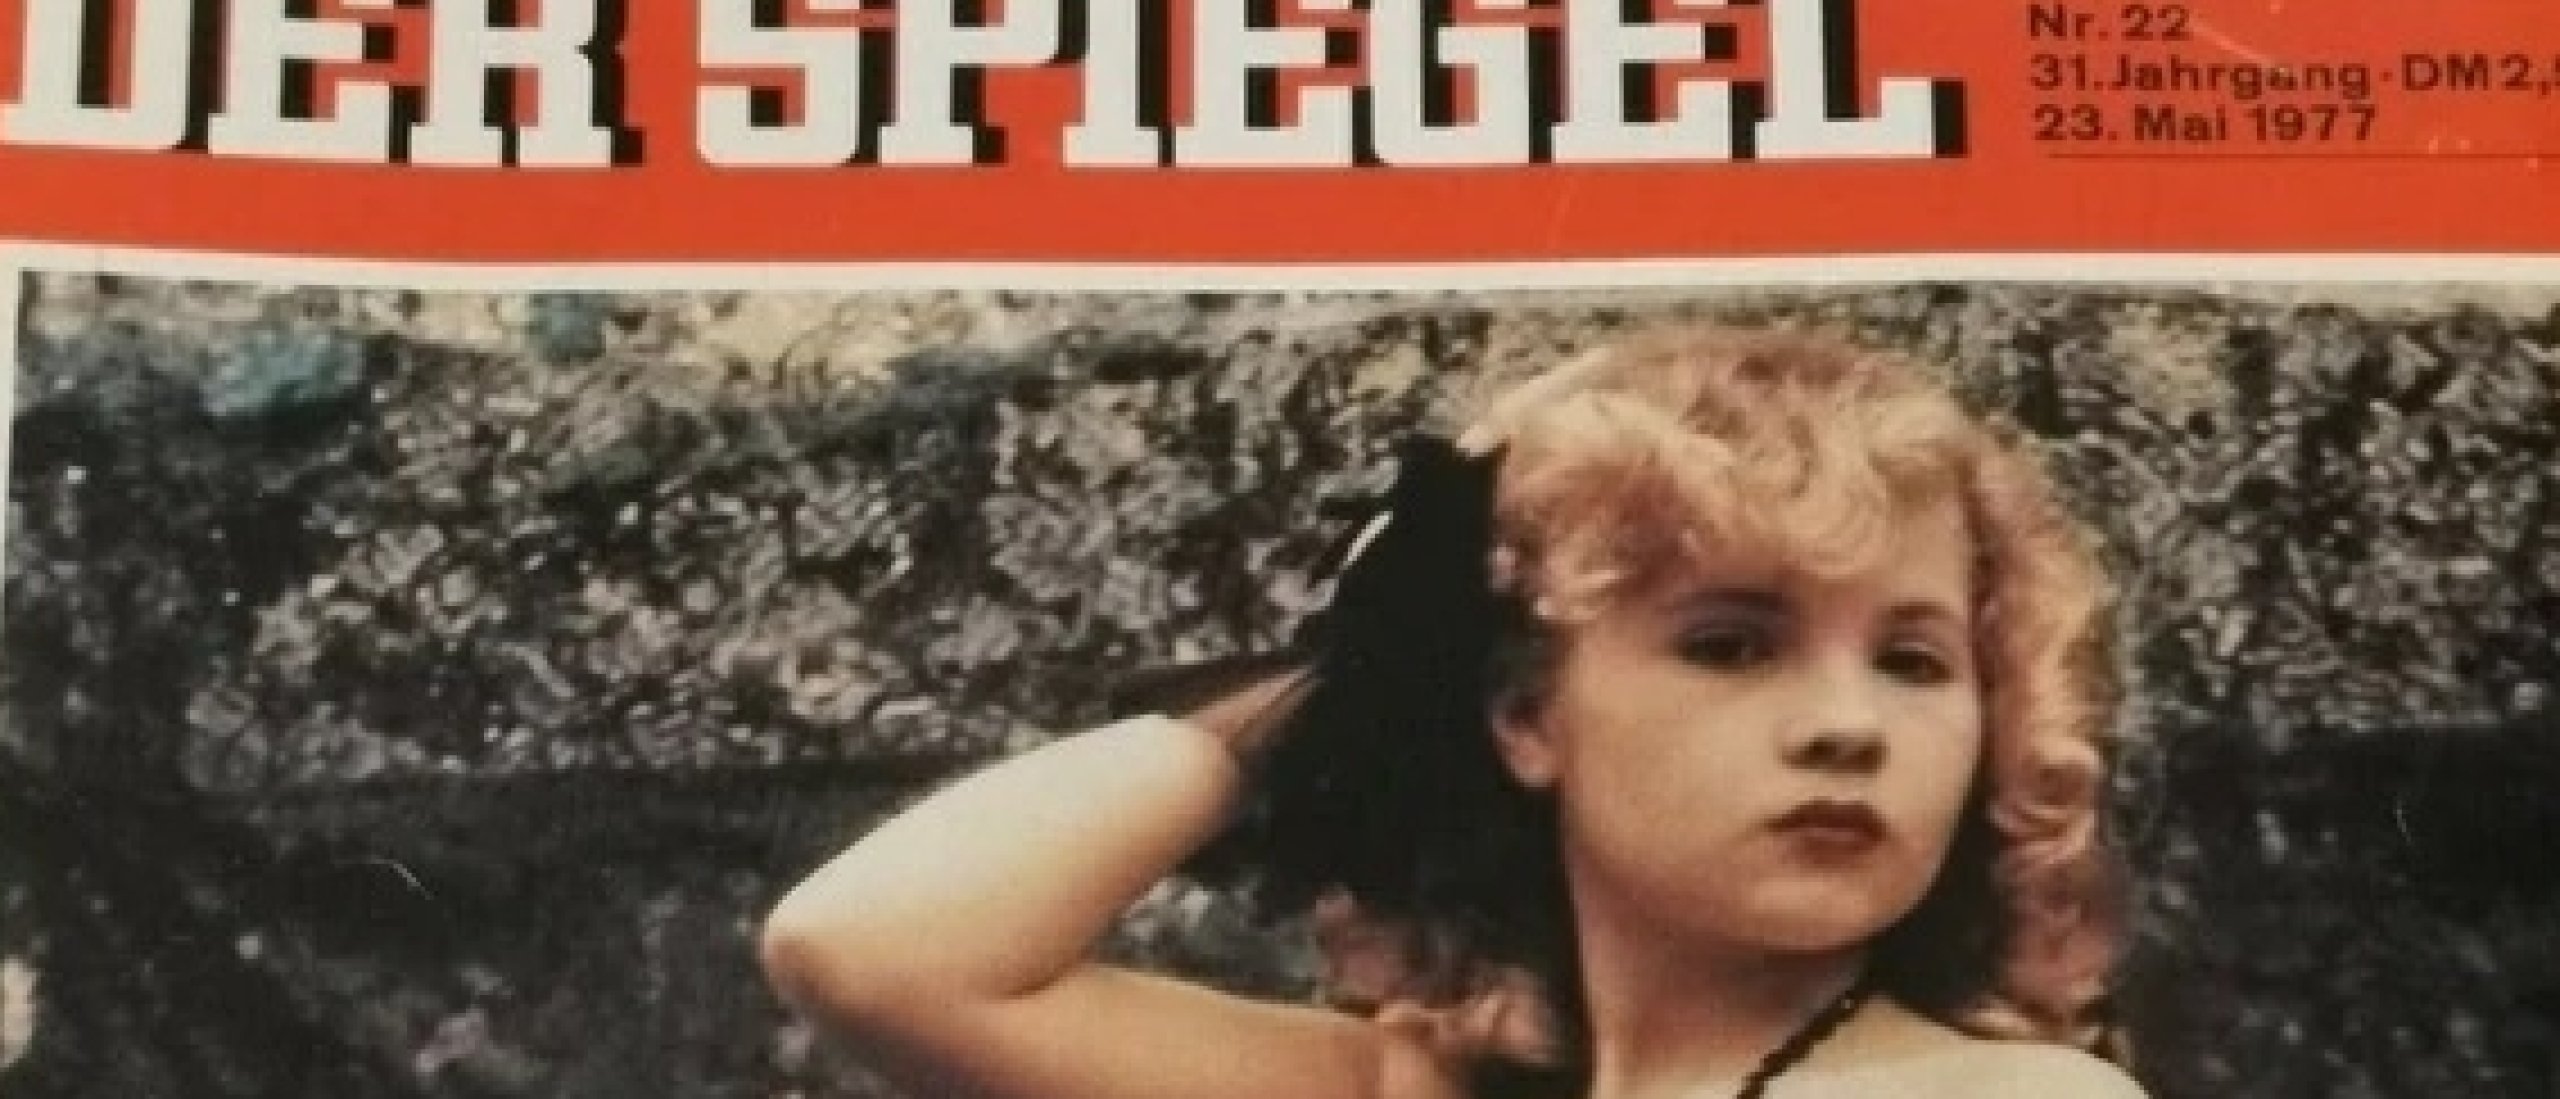 24 Covers of Der Spiegel With Unnecessary Tits, Part One